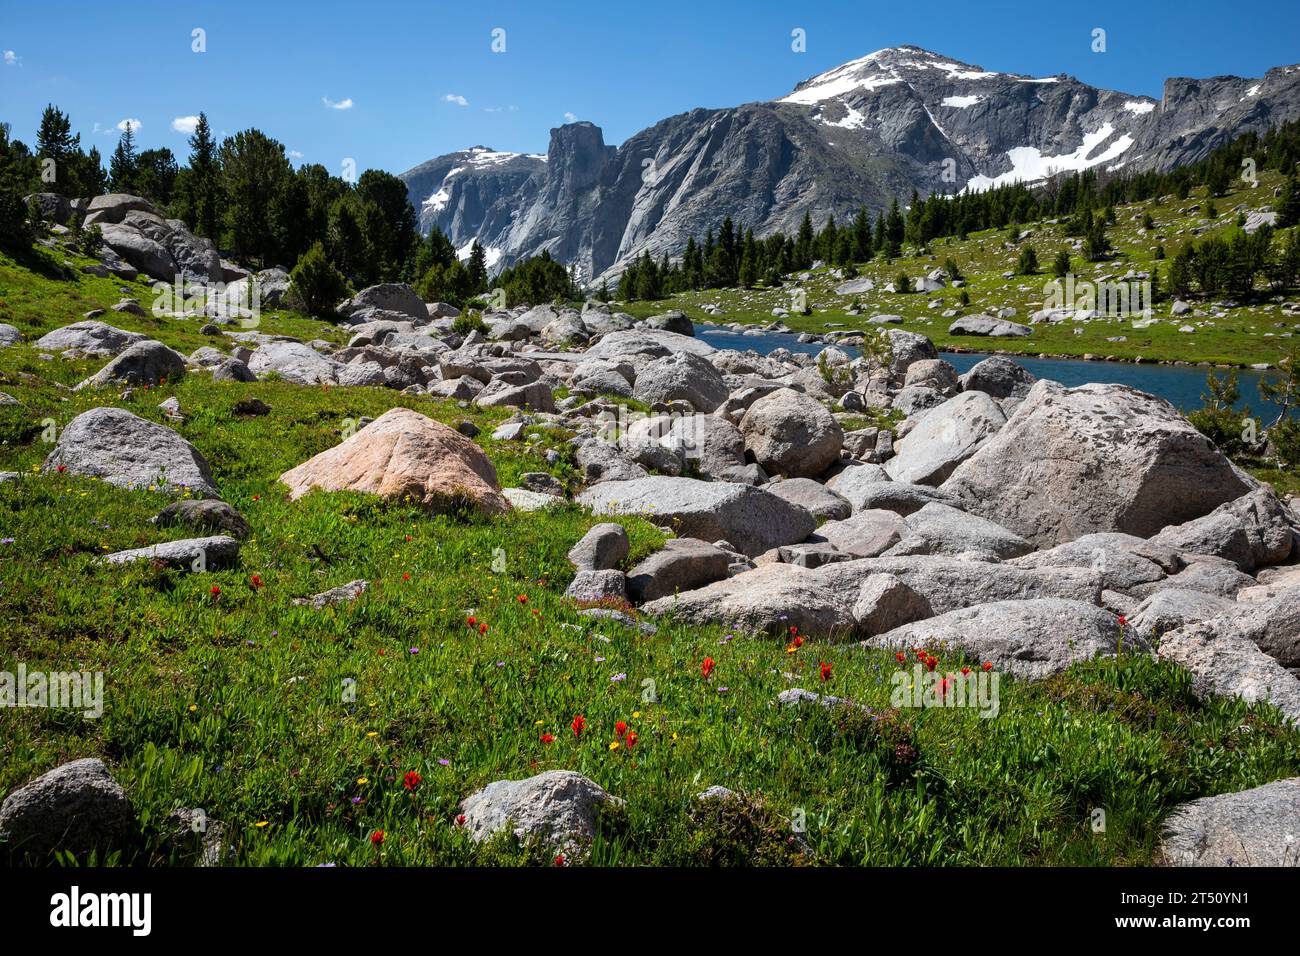 WY05573-00...WYOMING - The Monolith and Dogtooth Mountain from Upper Bear Lake in the Popo Agie Wilderness area. Stock Photo